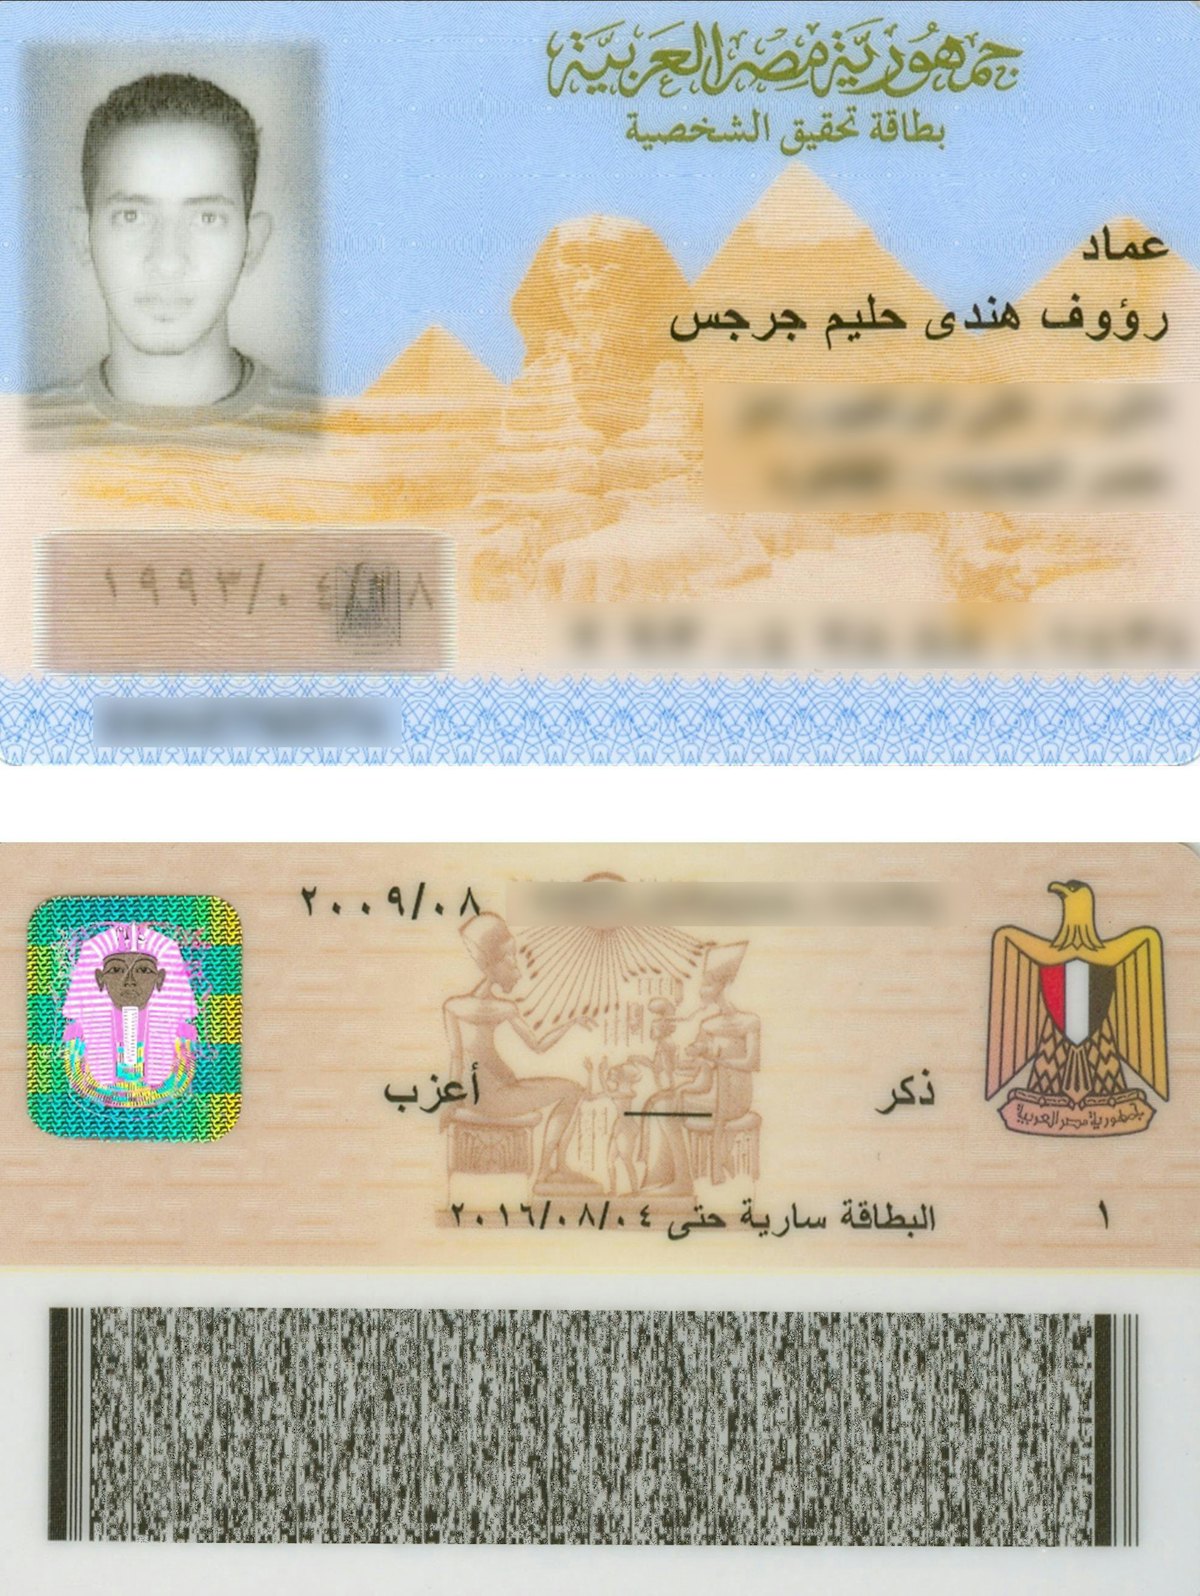 Official Egyptian national identification card issued to Imad Rauf Hindi on 8 August 2009, showing a "dash" on the back in the field reserved for religious affiliation.